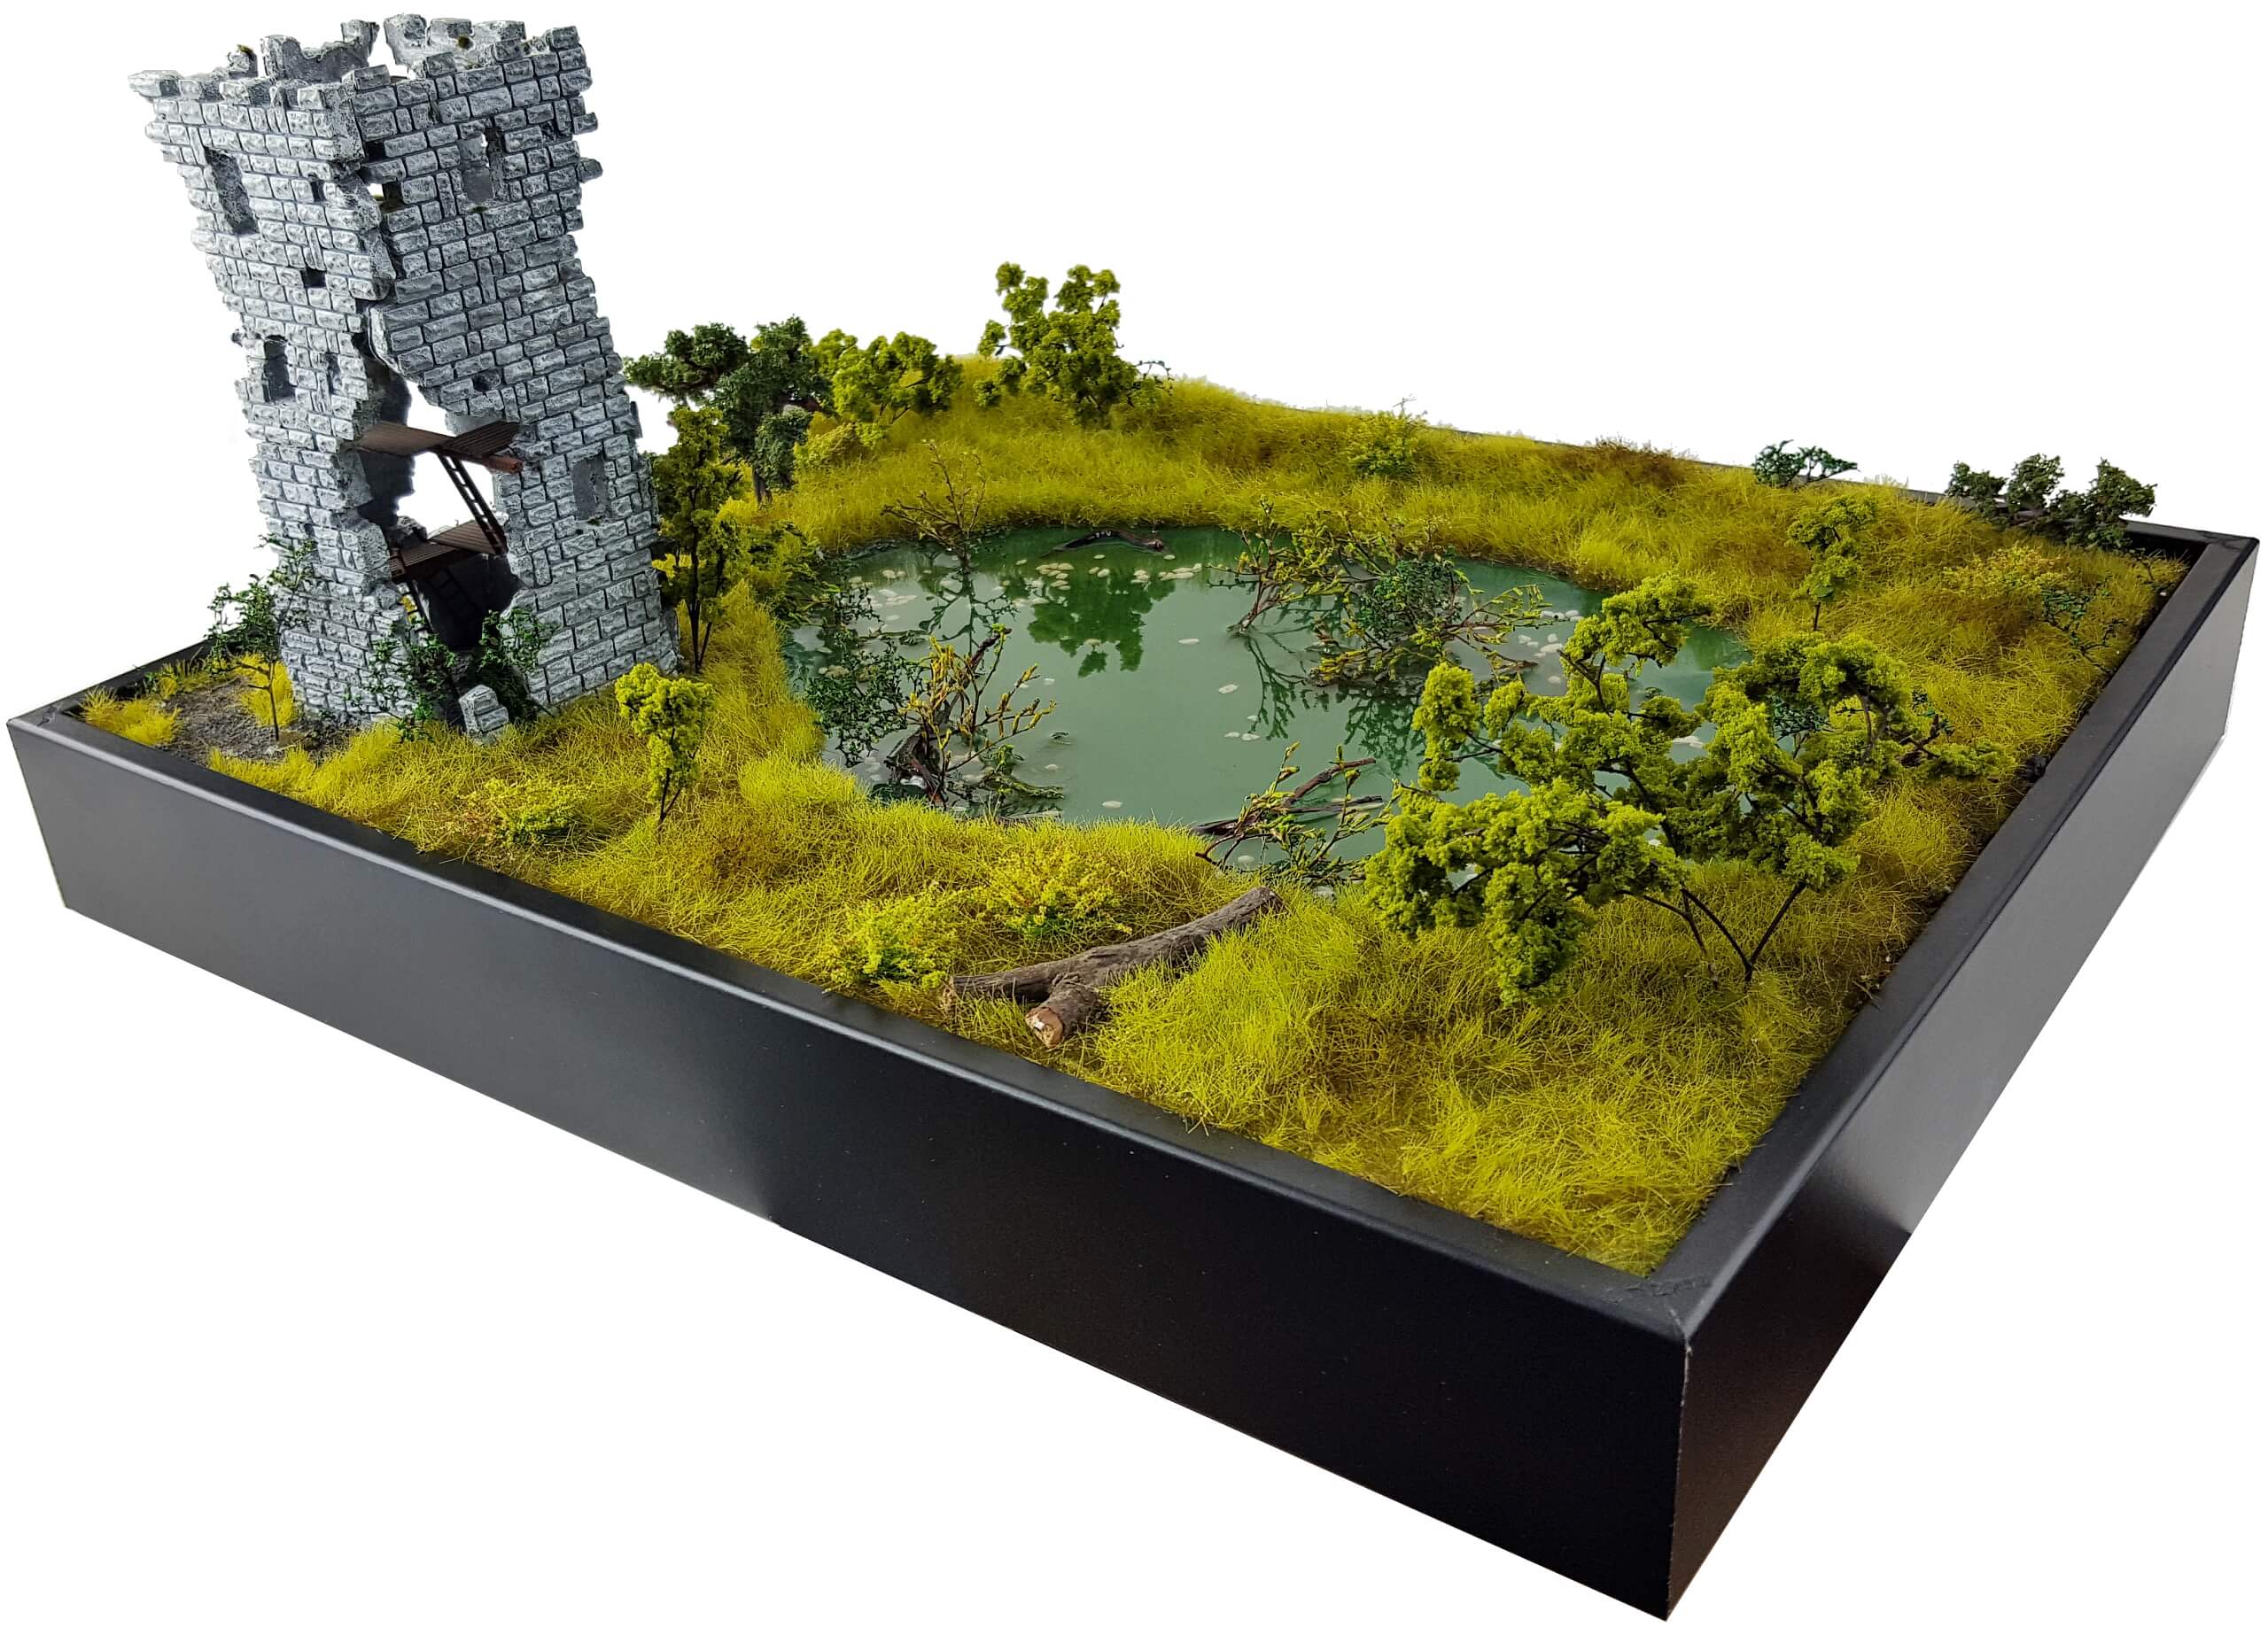 Ruined medieval tower with green landscape - H0 diorama